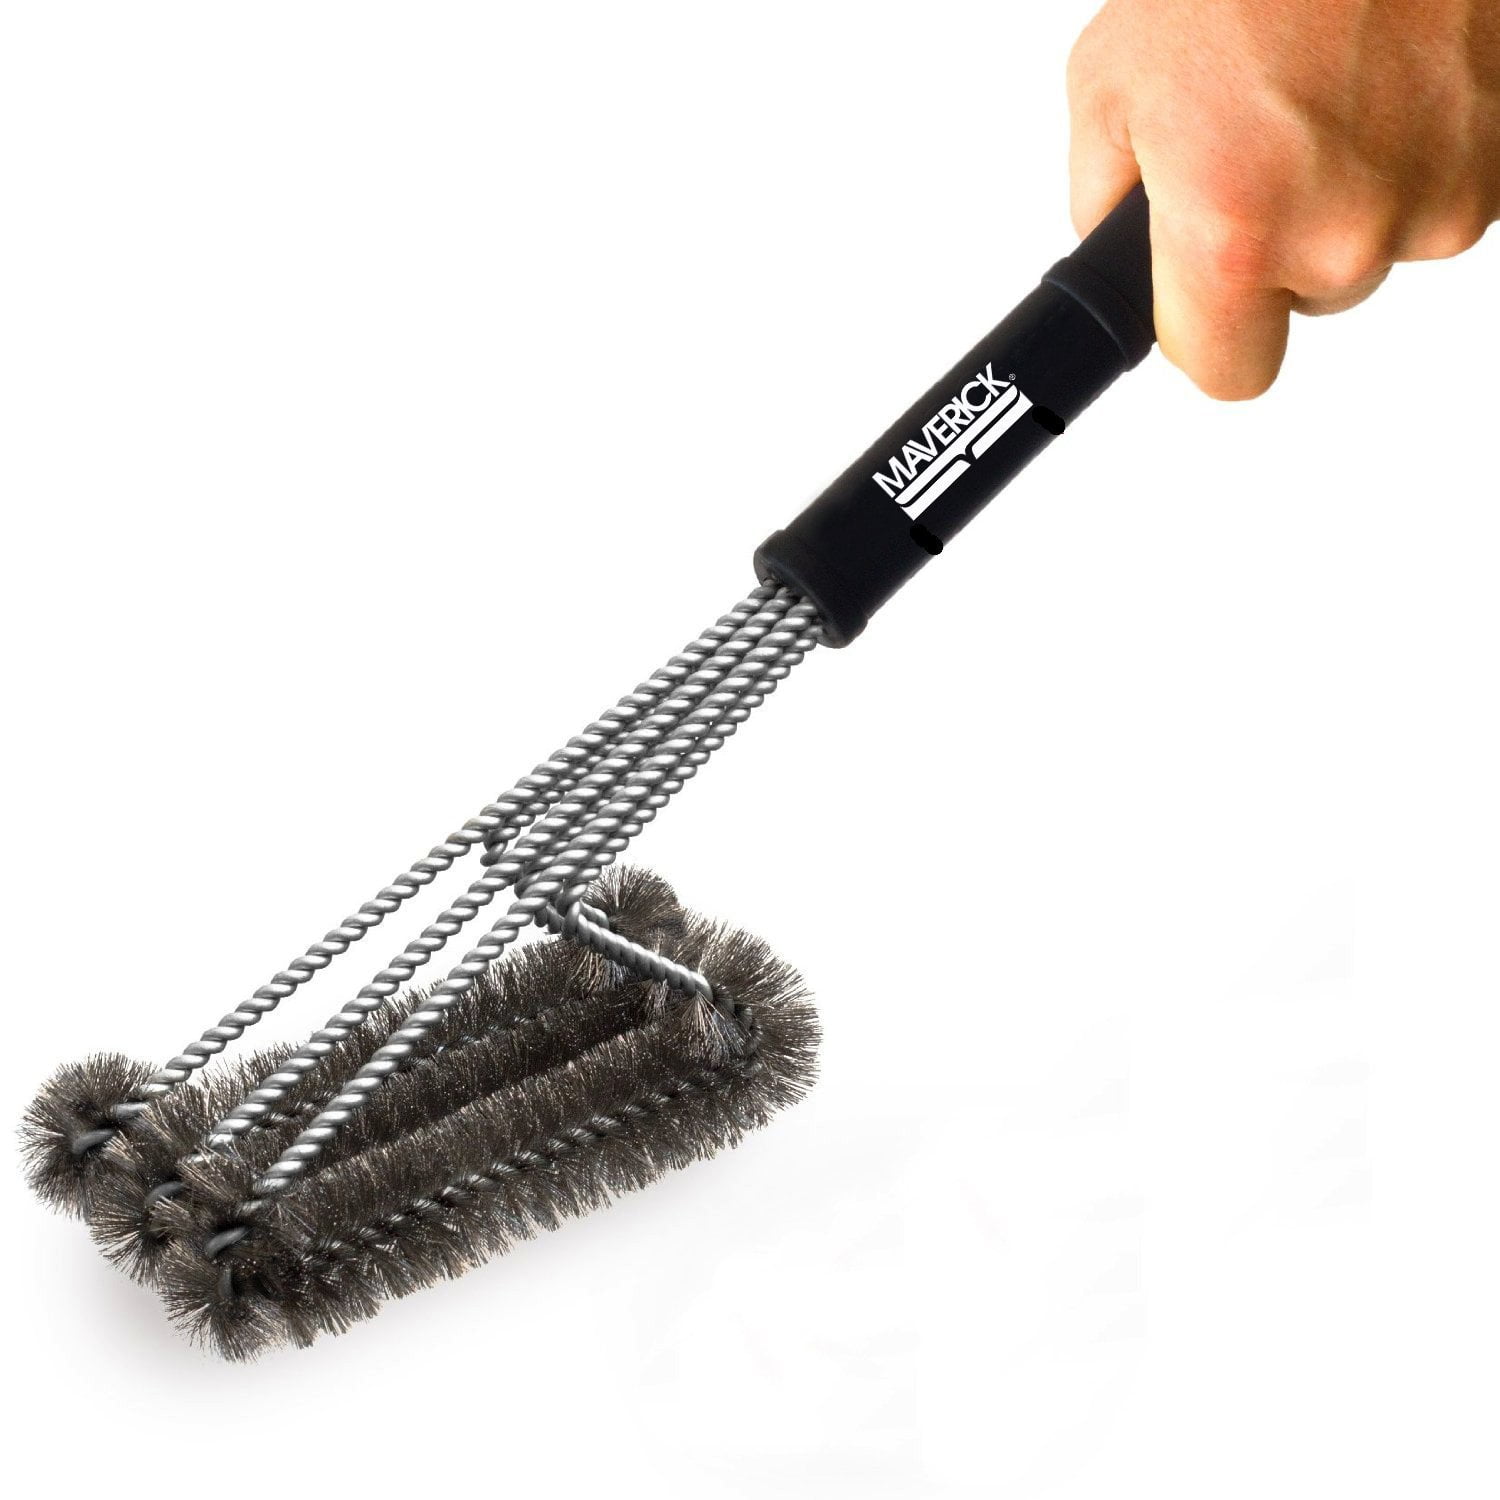 Maverick 18" Best BBQ Grill Brush 3 in 1, Durable and Effective